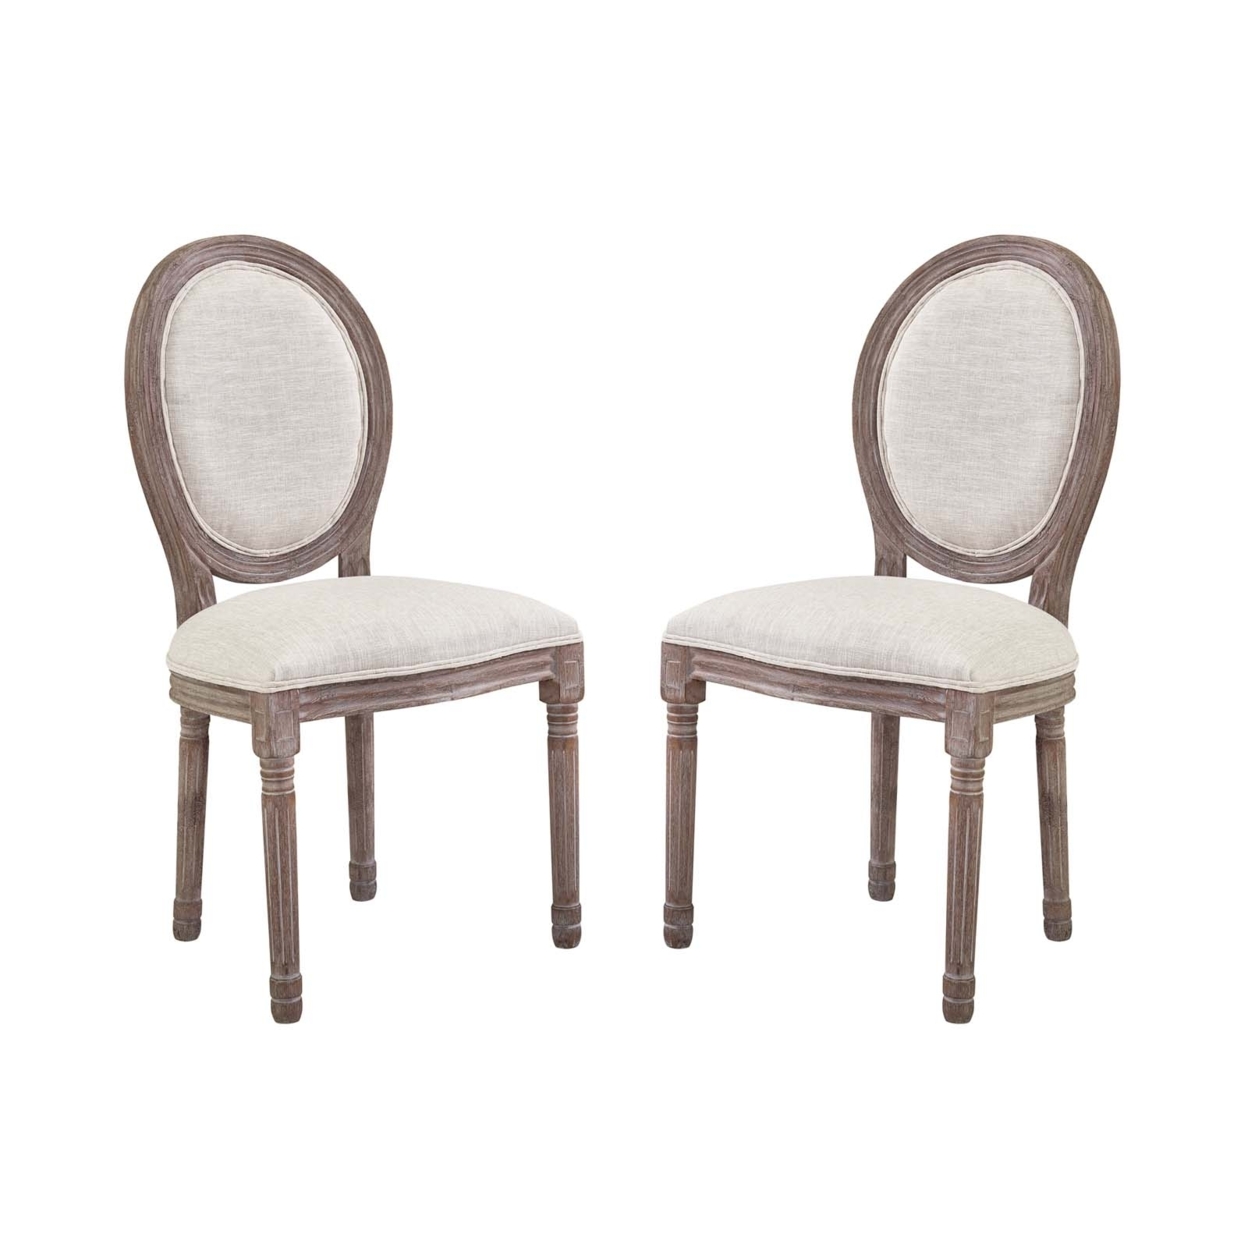 Emanate Dining Side Chair Upholstered Fabric Set Of 2,Beige